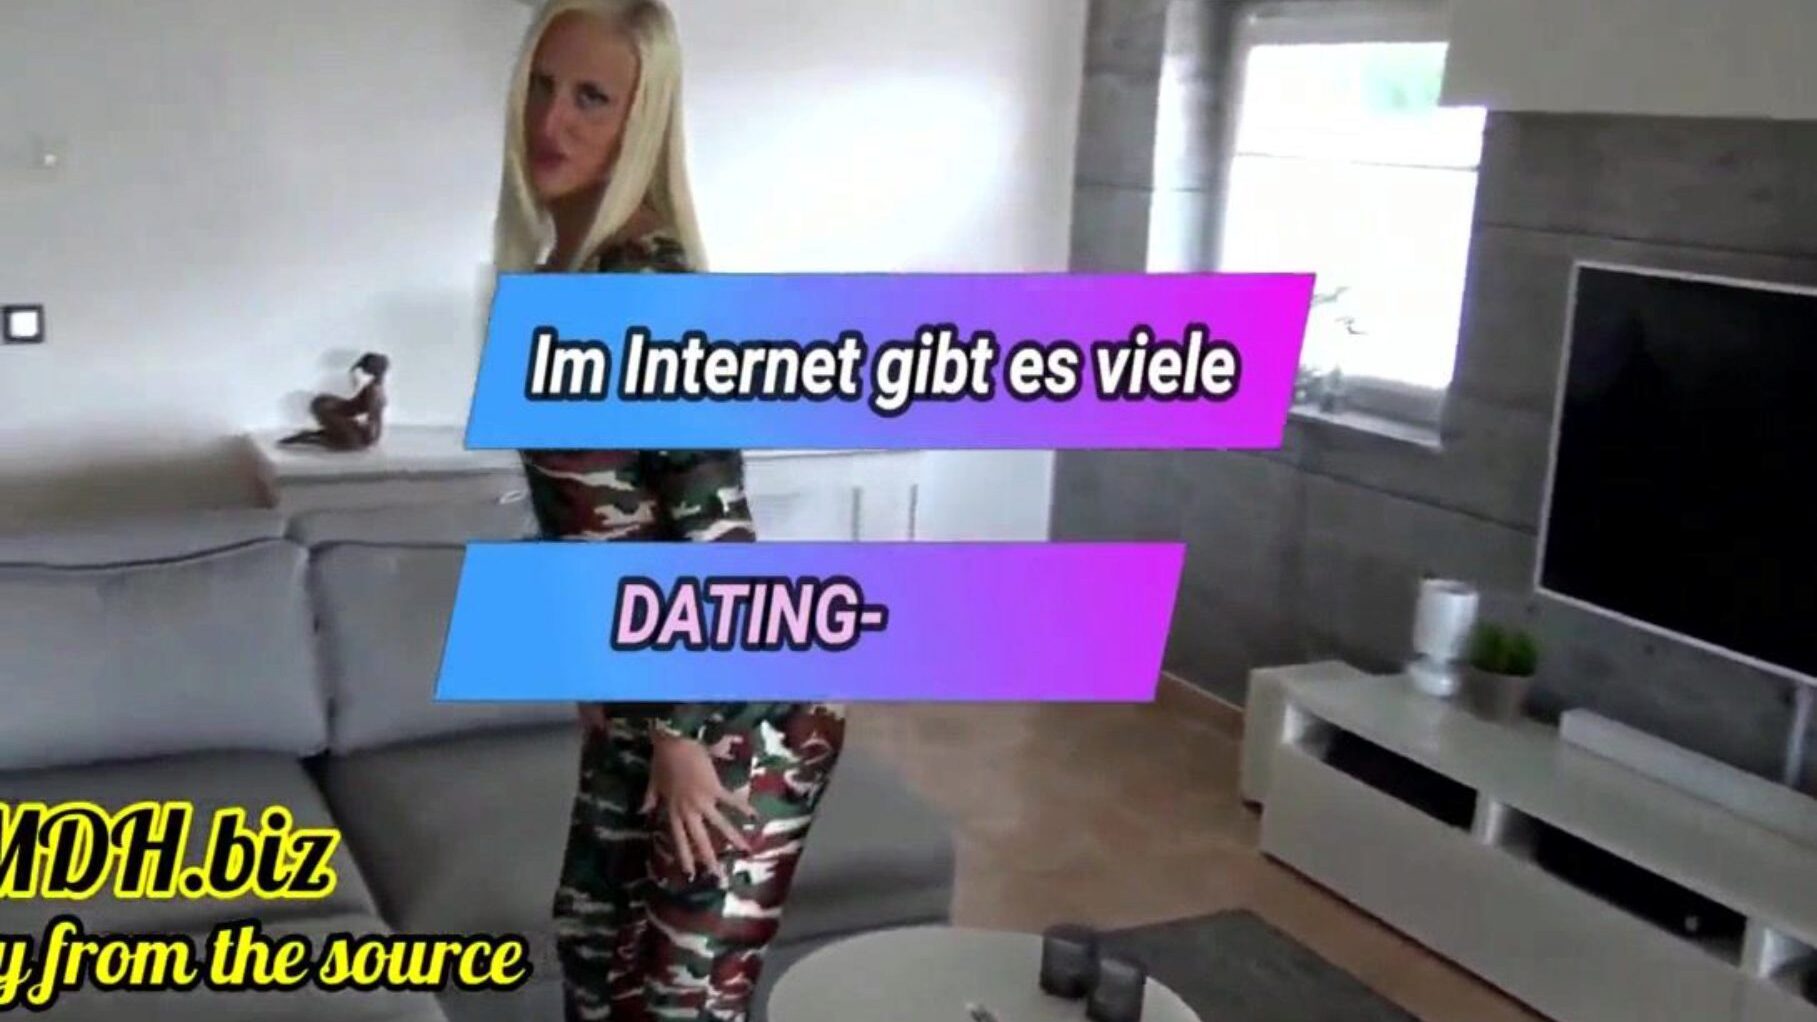 grob arsch deutsche mother i'd like to fuck gefickt hart - riesiger cumshot watch grob arsch deutsche mother i'd like to fuck gefickt hart - riesiger cumshot scene movie on xhamster - the ultimate database of free-for-all german squirting hd porno tube filme